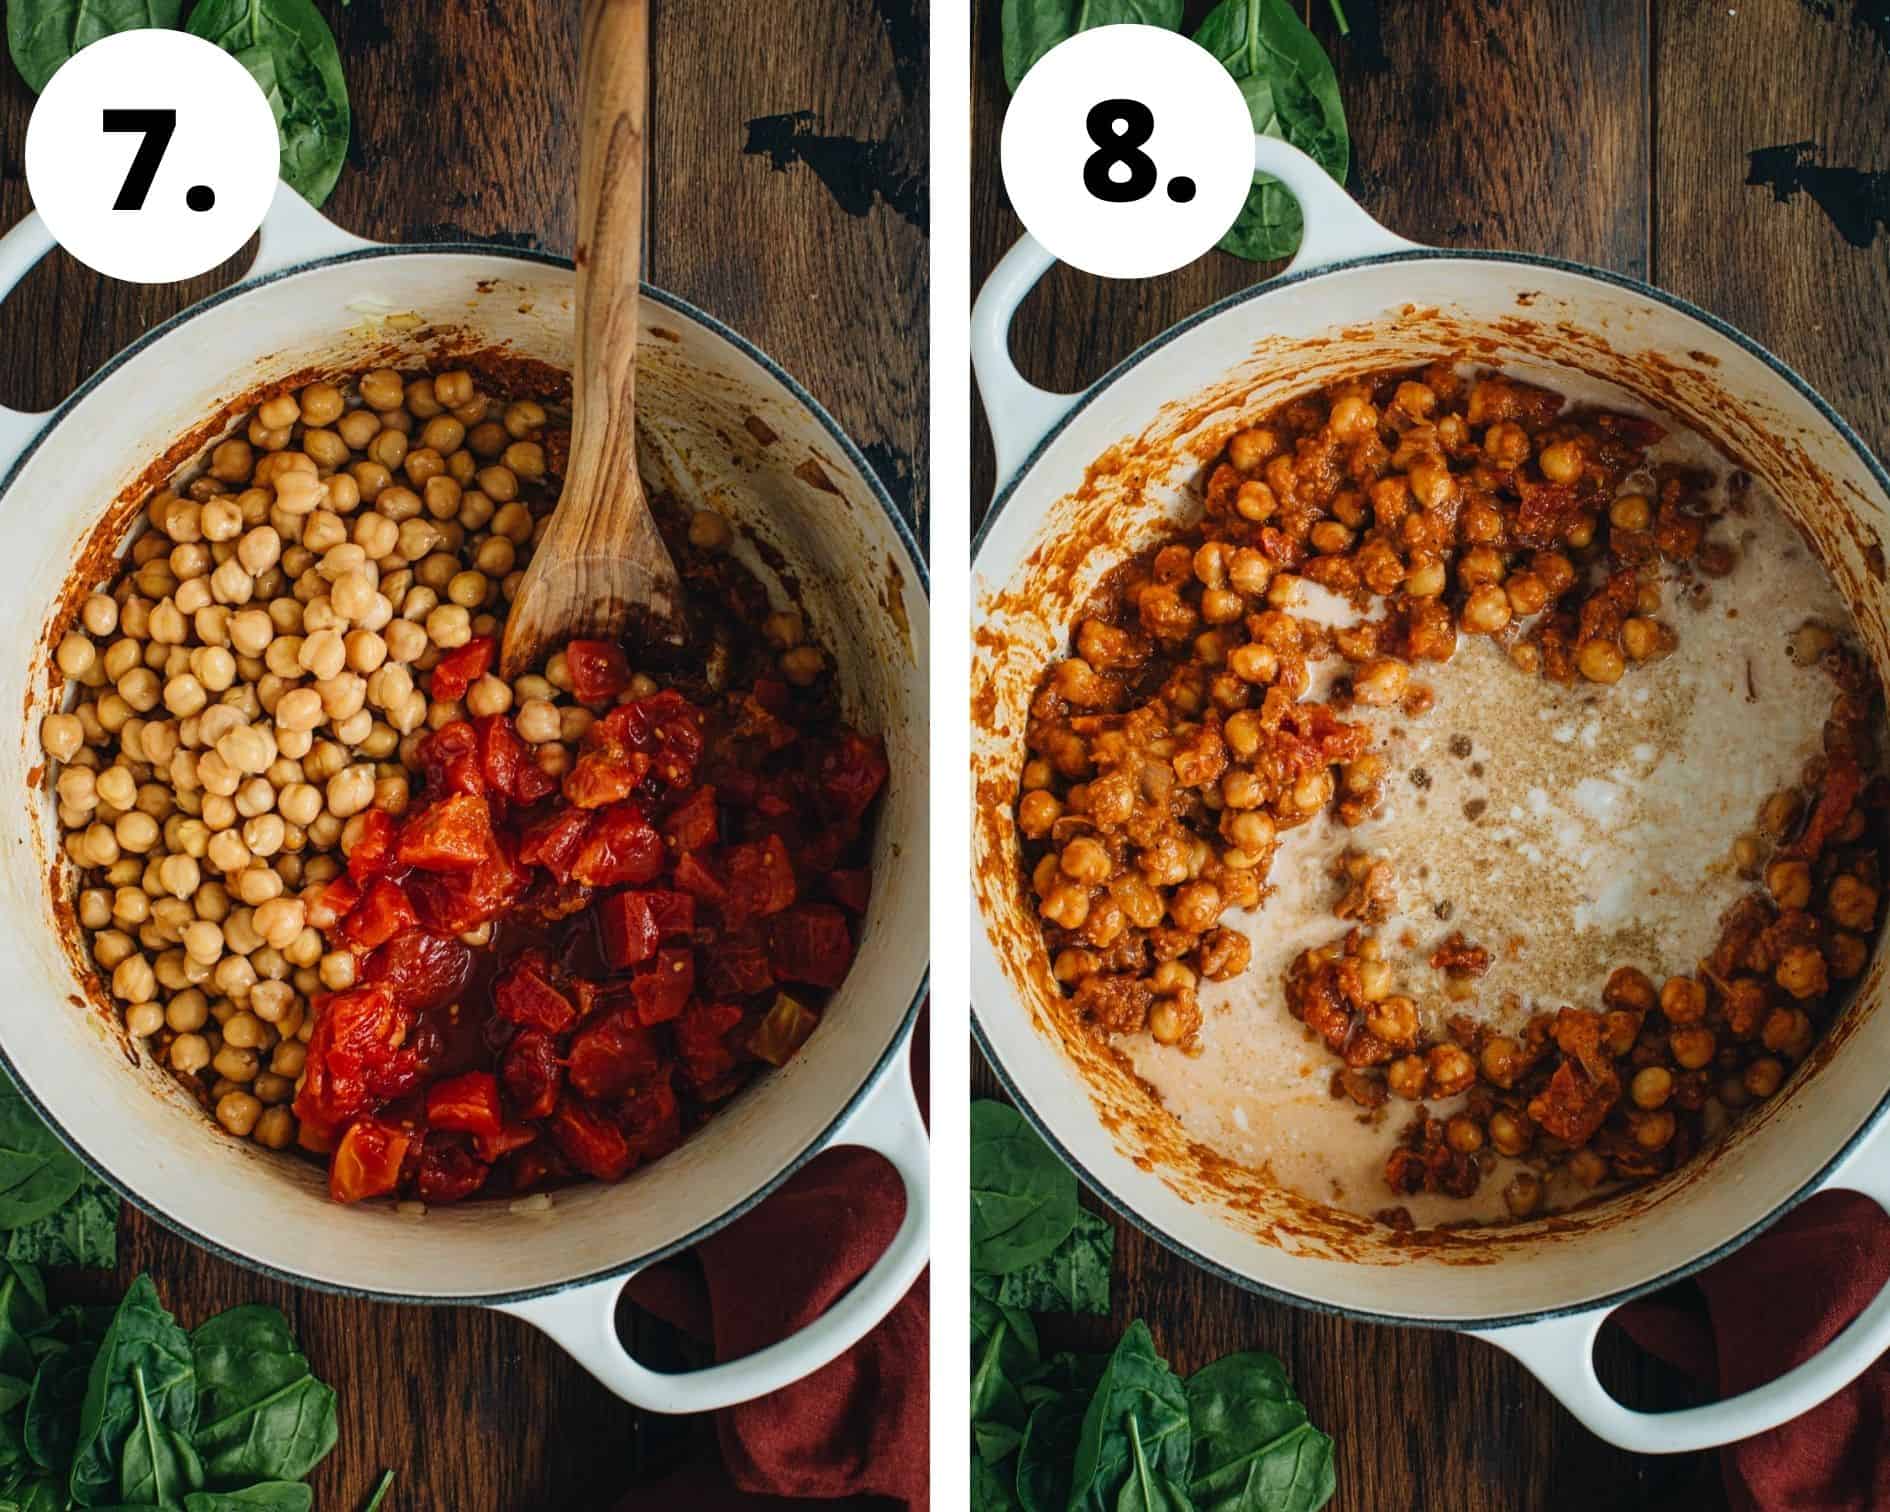 Chickpea curry process steps 7 and 8.